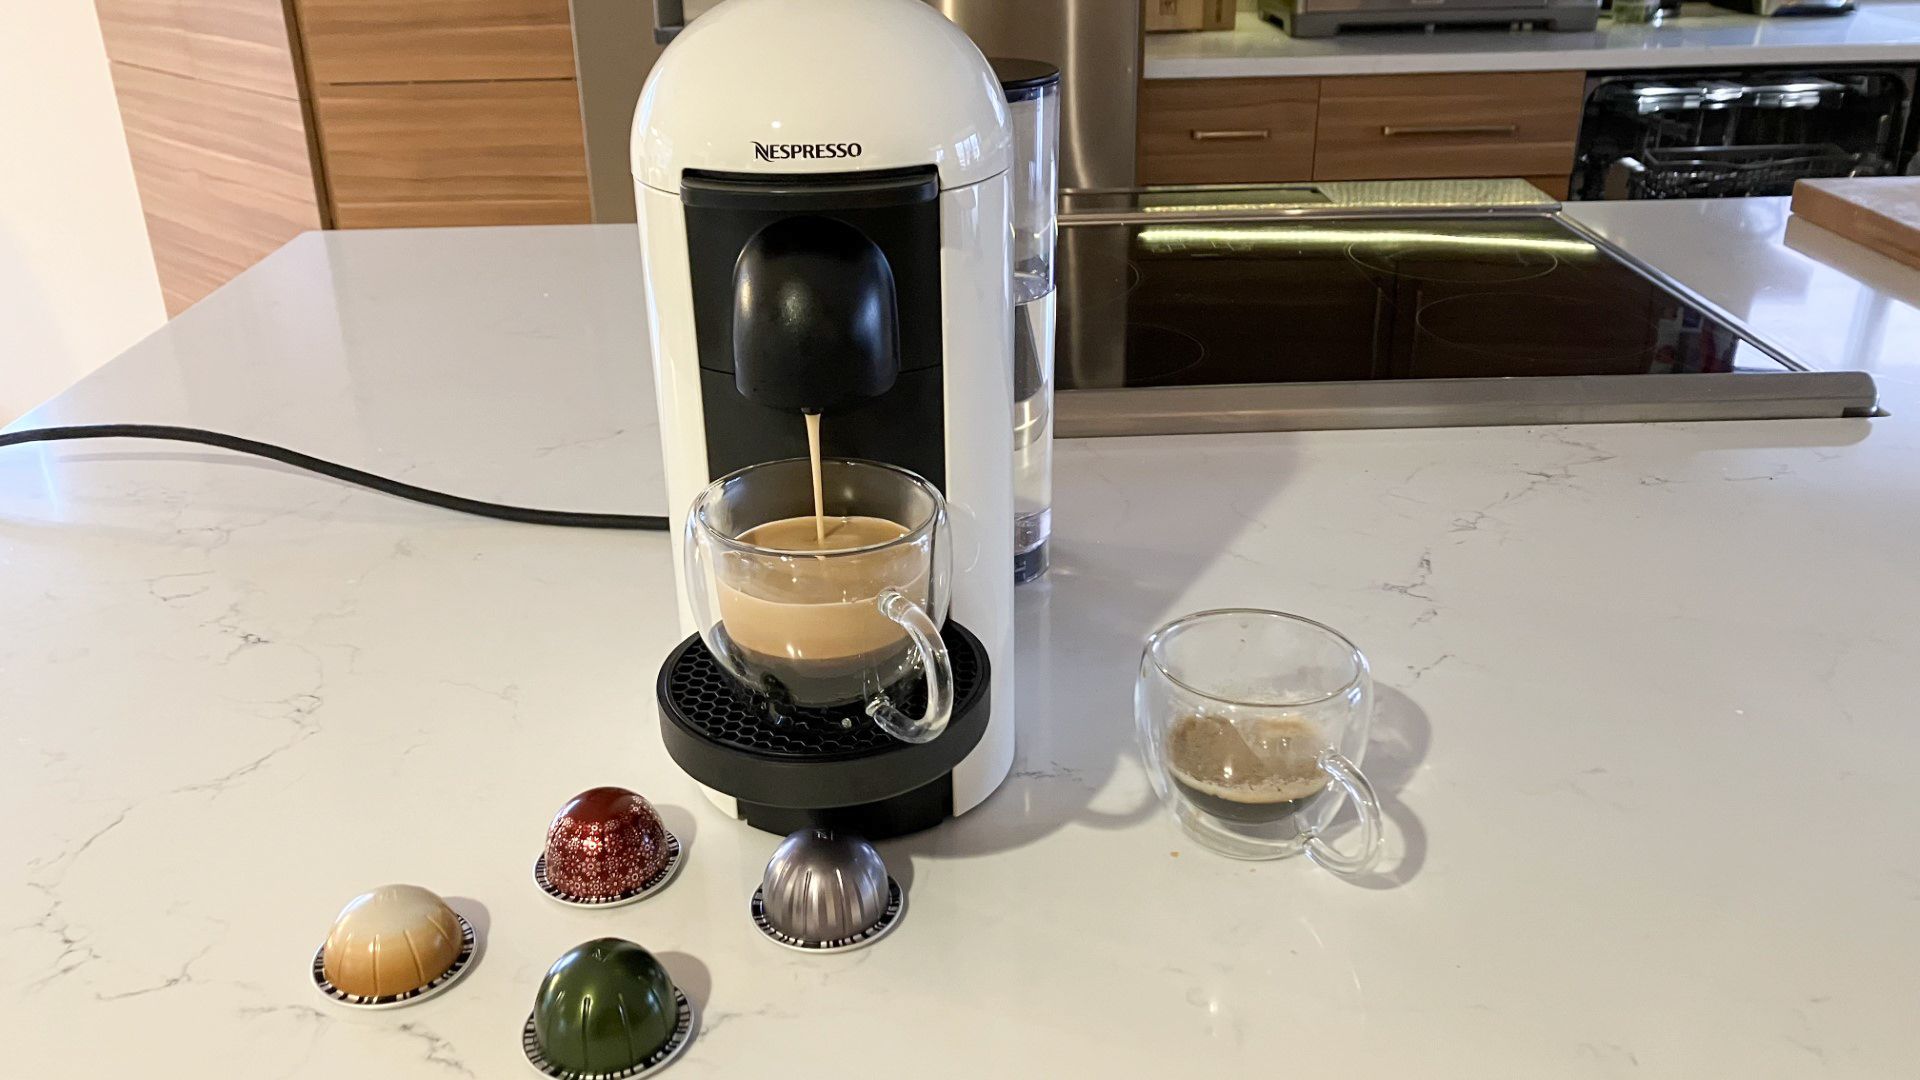 10 Best Selling Nespresso Coffee Machines for 2023 - The Jerusalem